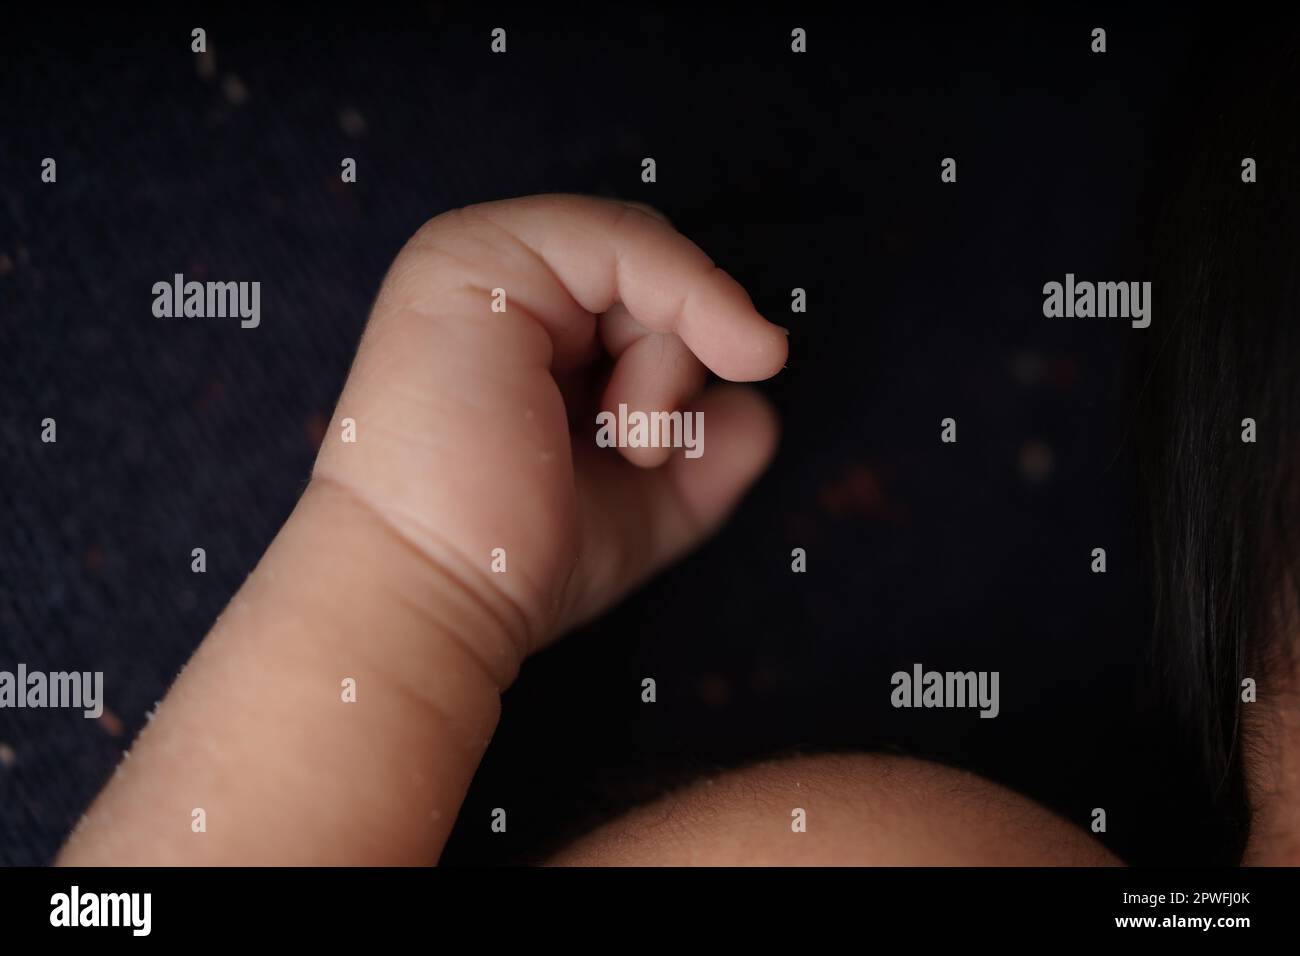 Tiny baby body and hands on navy blue background blanket. close-up view of the baby's cute hand the baby is laying comfortably in a blue blanket. Stock Photo